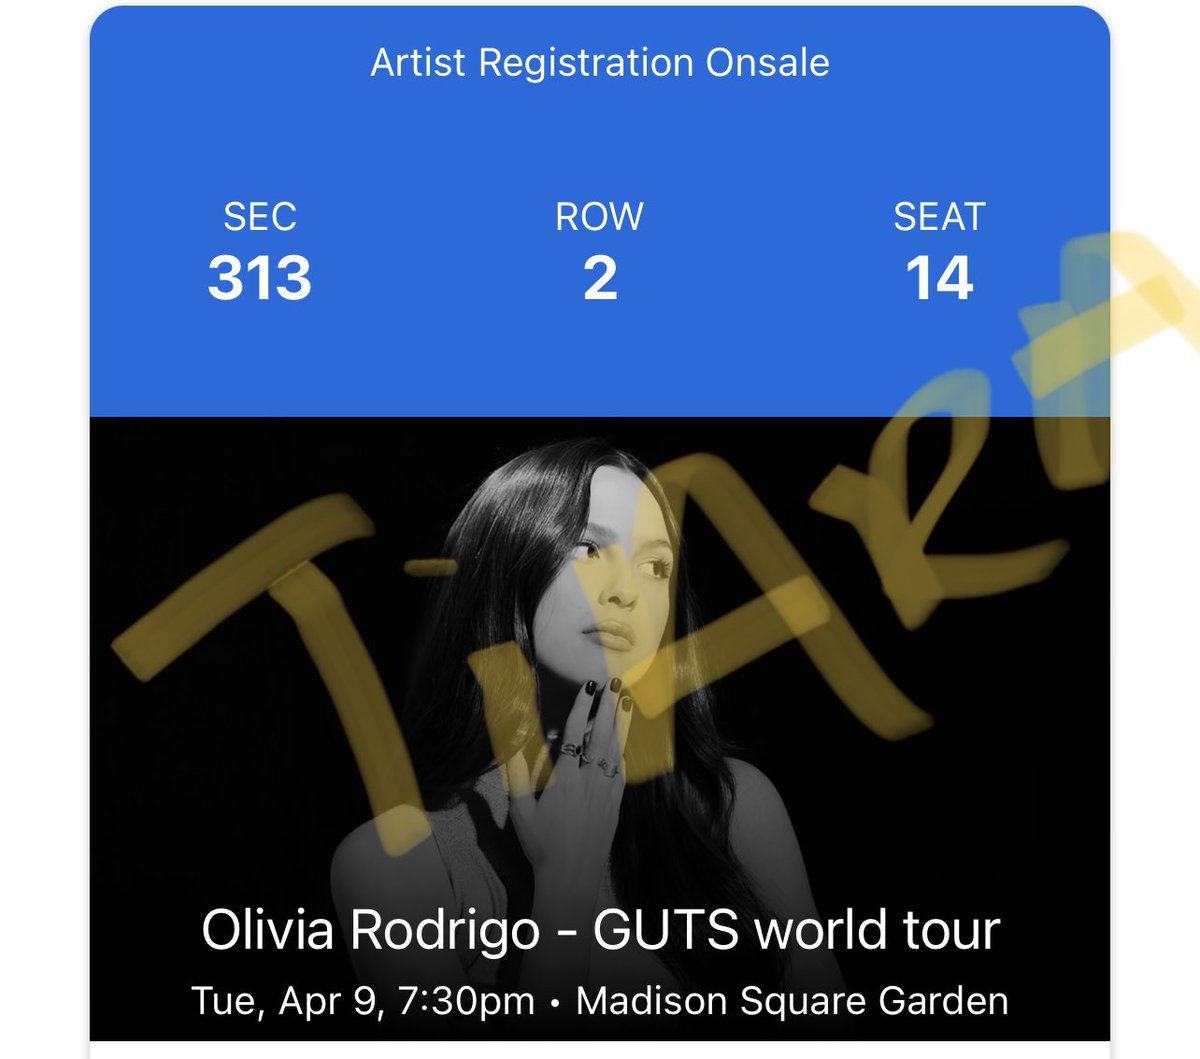 I am selling my Olivia Rodrigo tickets for the 9th
on Tuesday. Let me know if you're interested!!
#OliviaRodrigo #Oliviarodrigoconcert
#SellingTickets #GutsTour